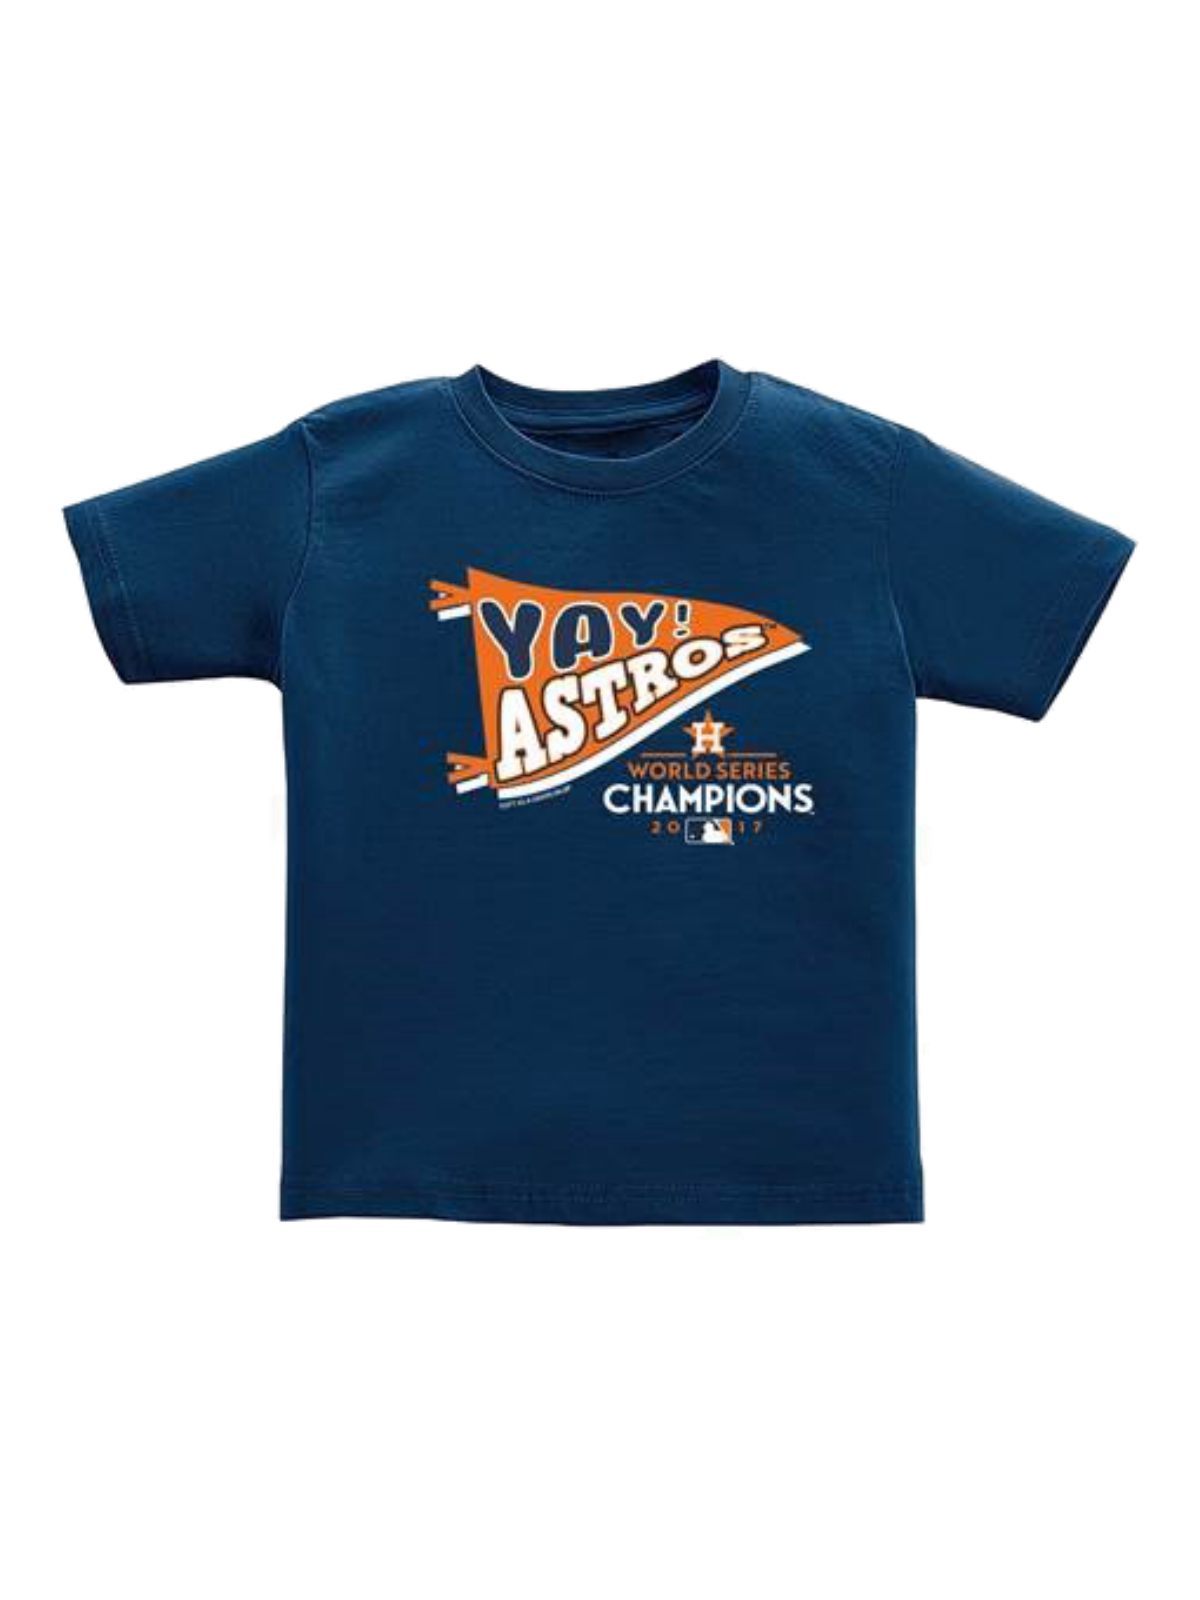 Houston Astros 2017 World Series Champions INFANT Baby YAY ASTROS T-Shirt